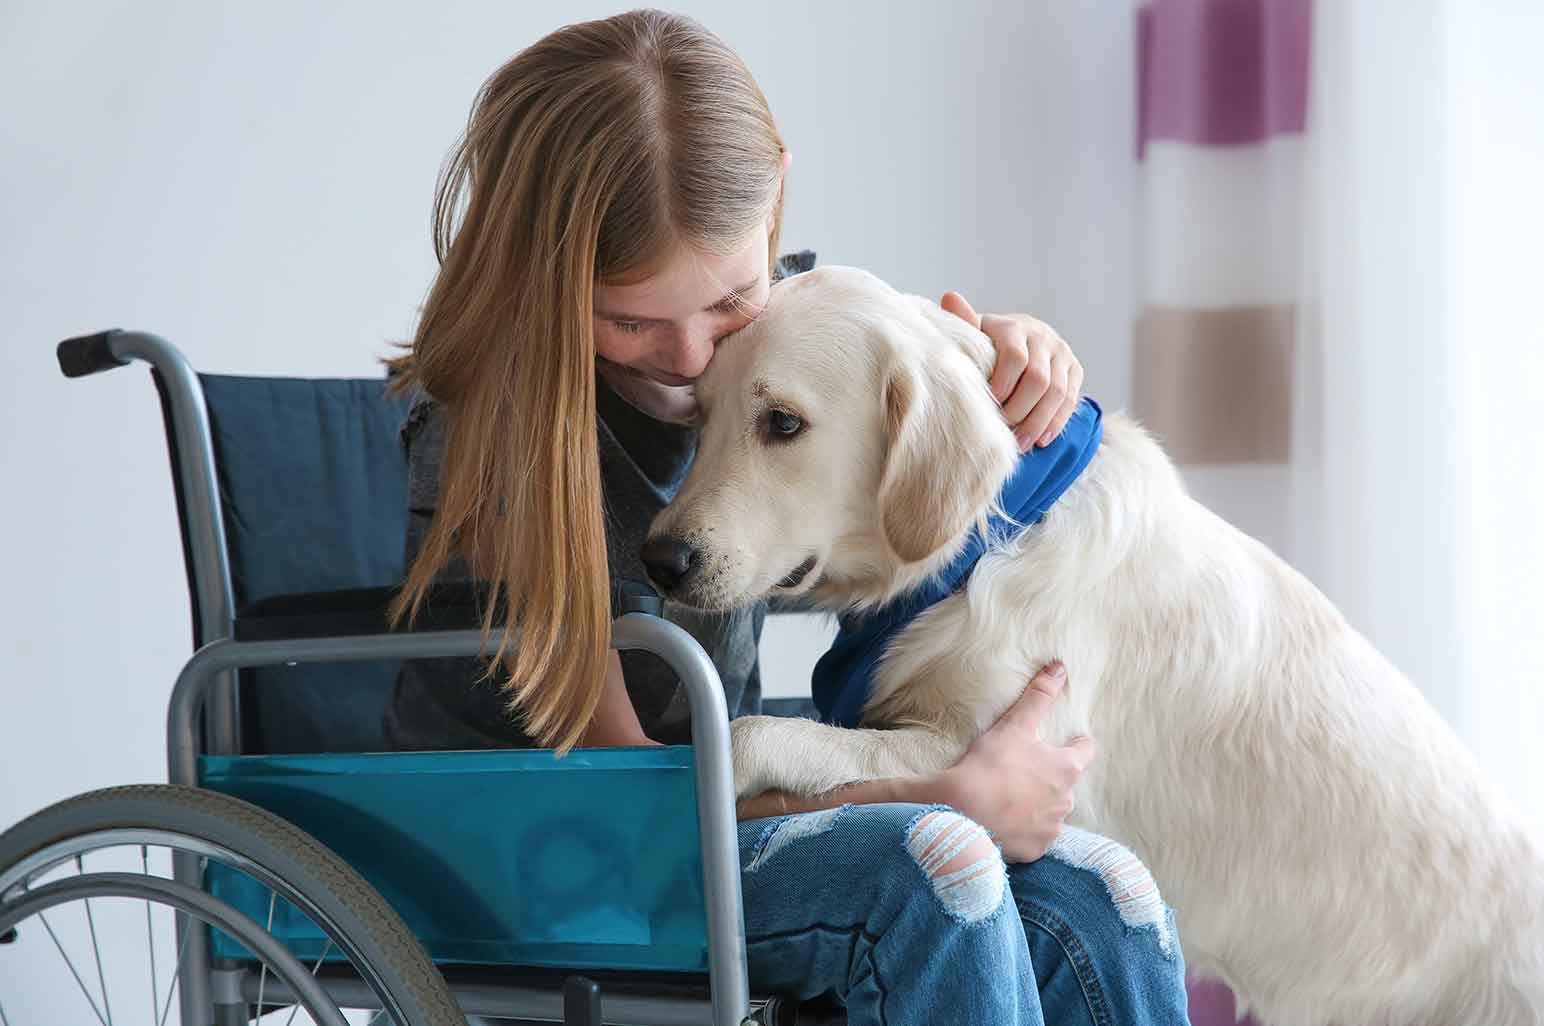 Can Service Dogs Help Children Cope with Anxiety?